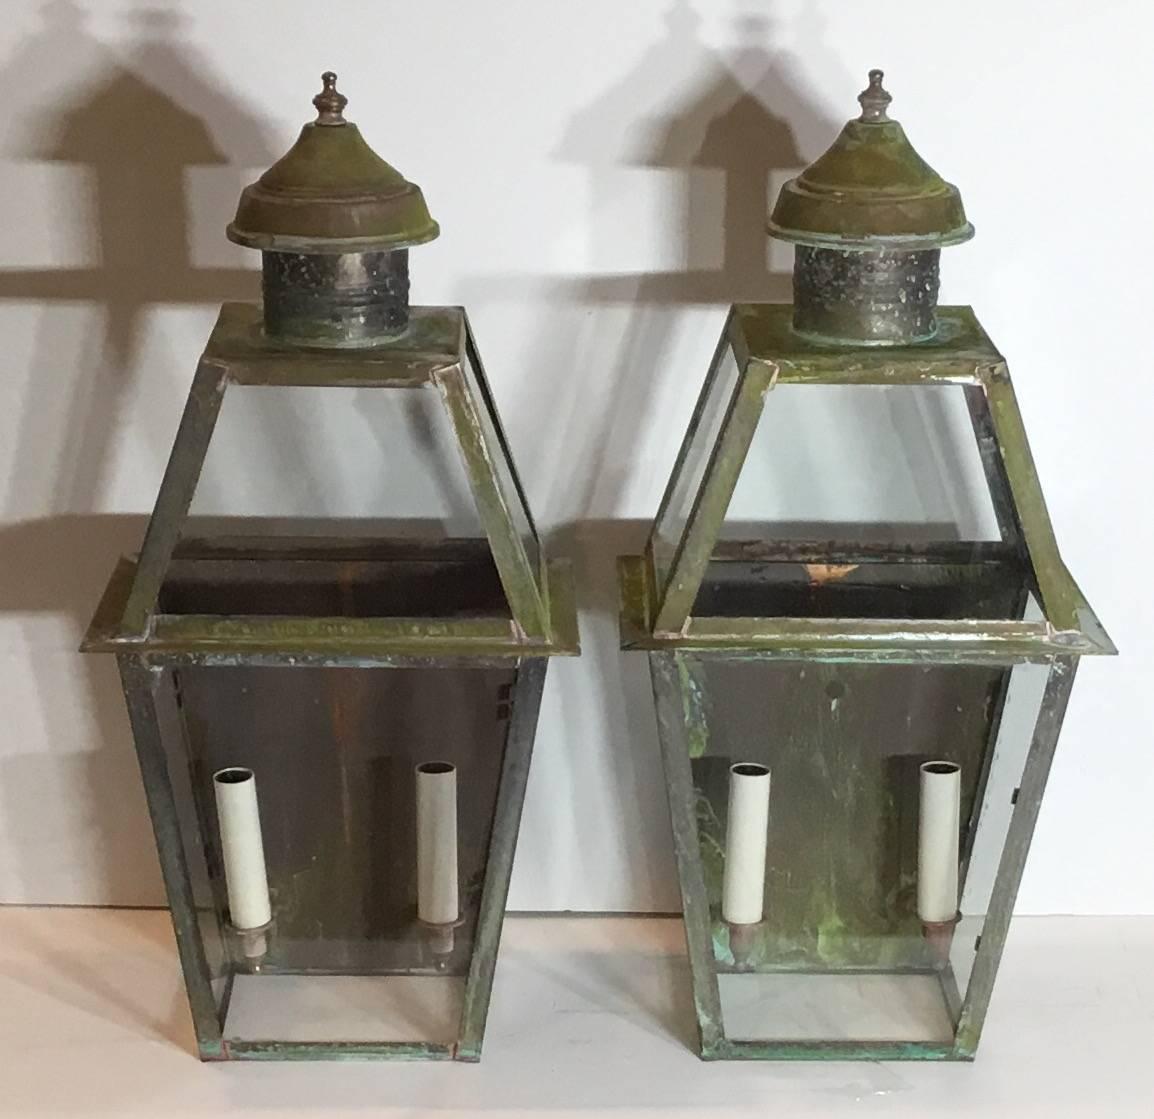 20th Century Pair of Large Architectural Wall Lanterns